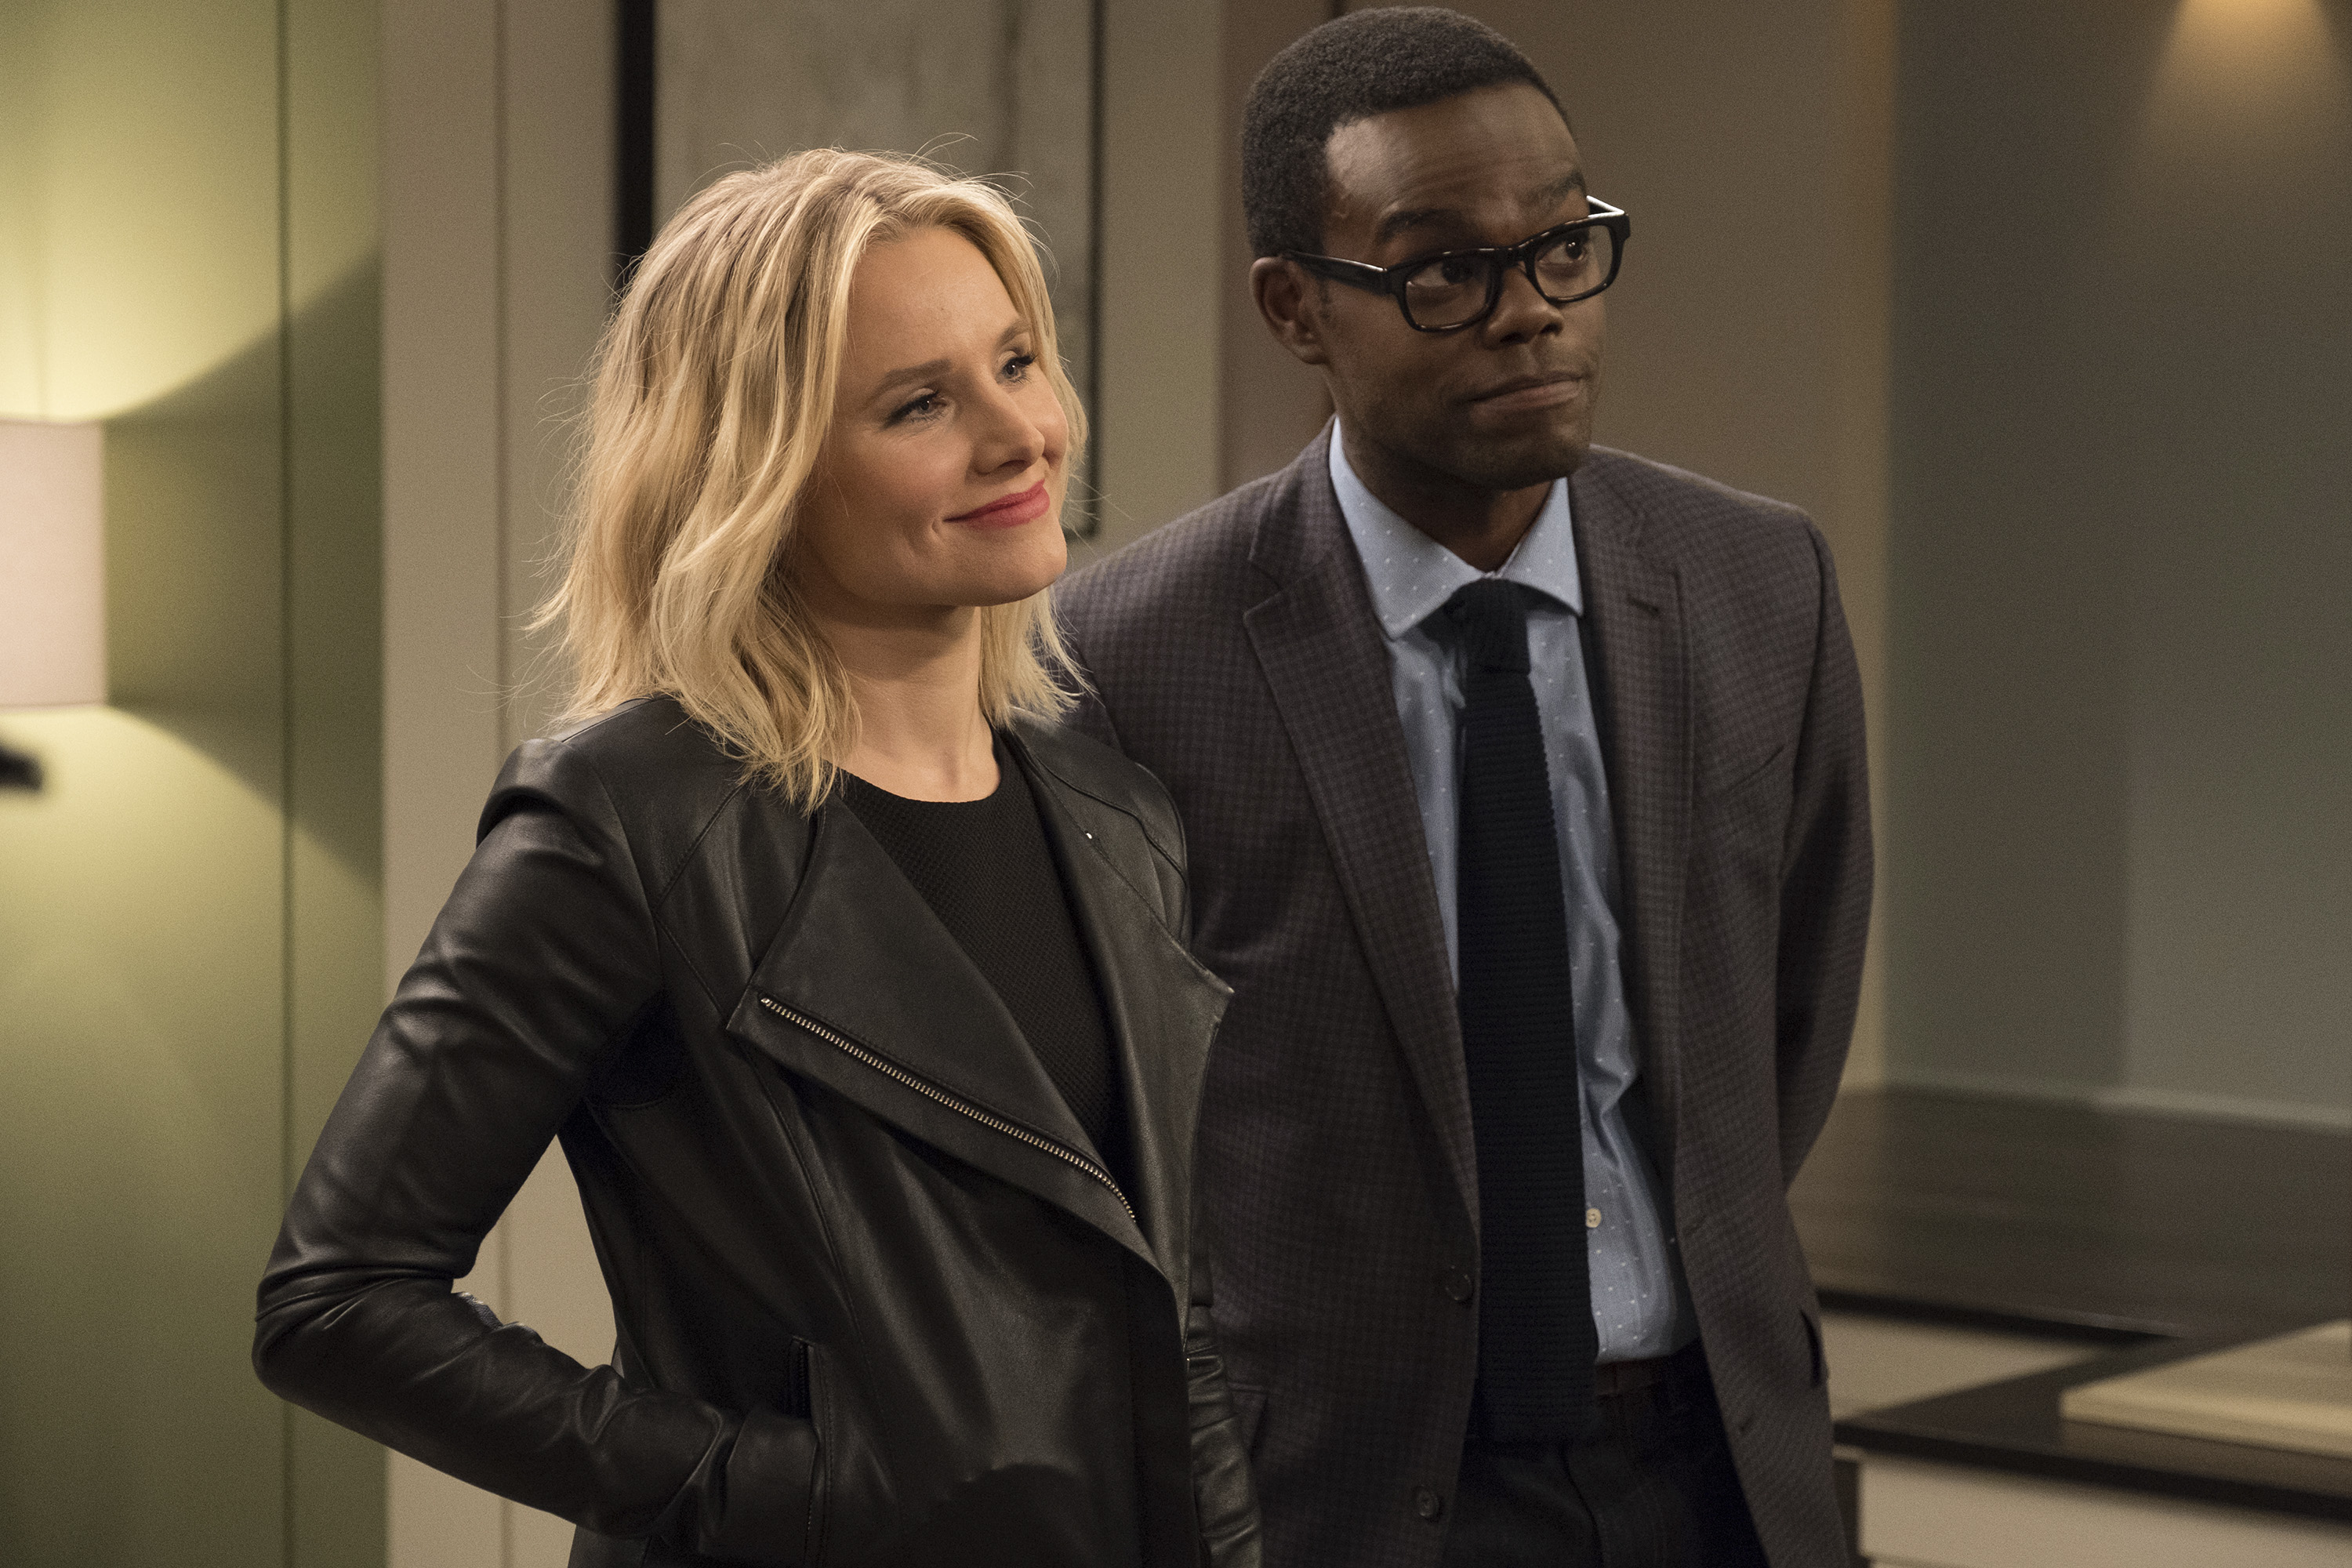 Kristen Bell and William Jackson Harper in <em>The Good Place</em> (NBCU Photo Bank via Getty Images.)